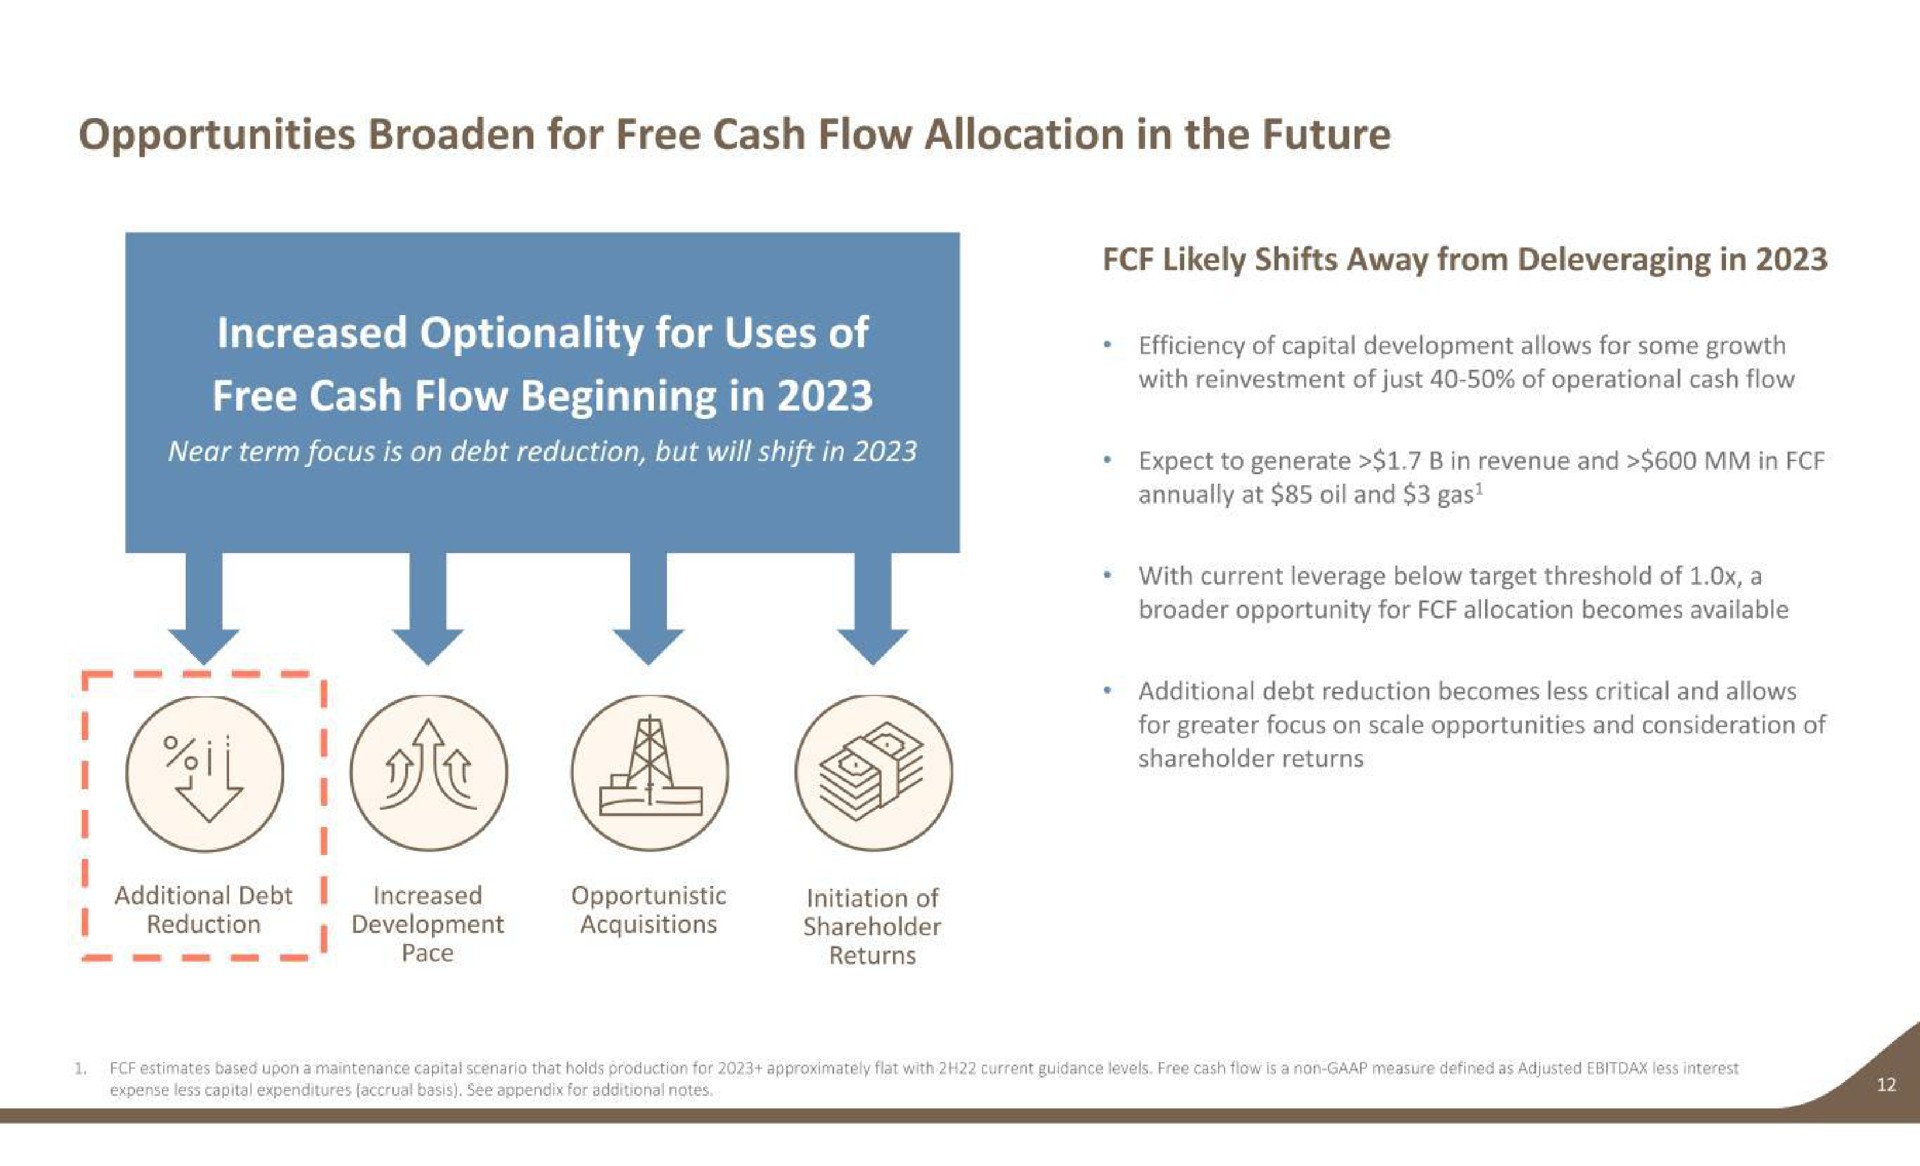 opportunities broaden for free cash flow allocation in the future free cash flow beginning in near term focus is on debt reduction but will shift in reduction i development acquisitions shareholder likely shifts away from in expect to generate in revenue and in annually at oil and gas with current leverage below target threshold of a opportunity for allocation becomes available additional debt reduction becomes less critical and allows for greater focus on scale opportunities and consideration of | Earthstone Energy